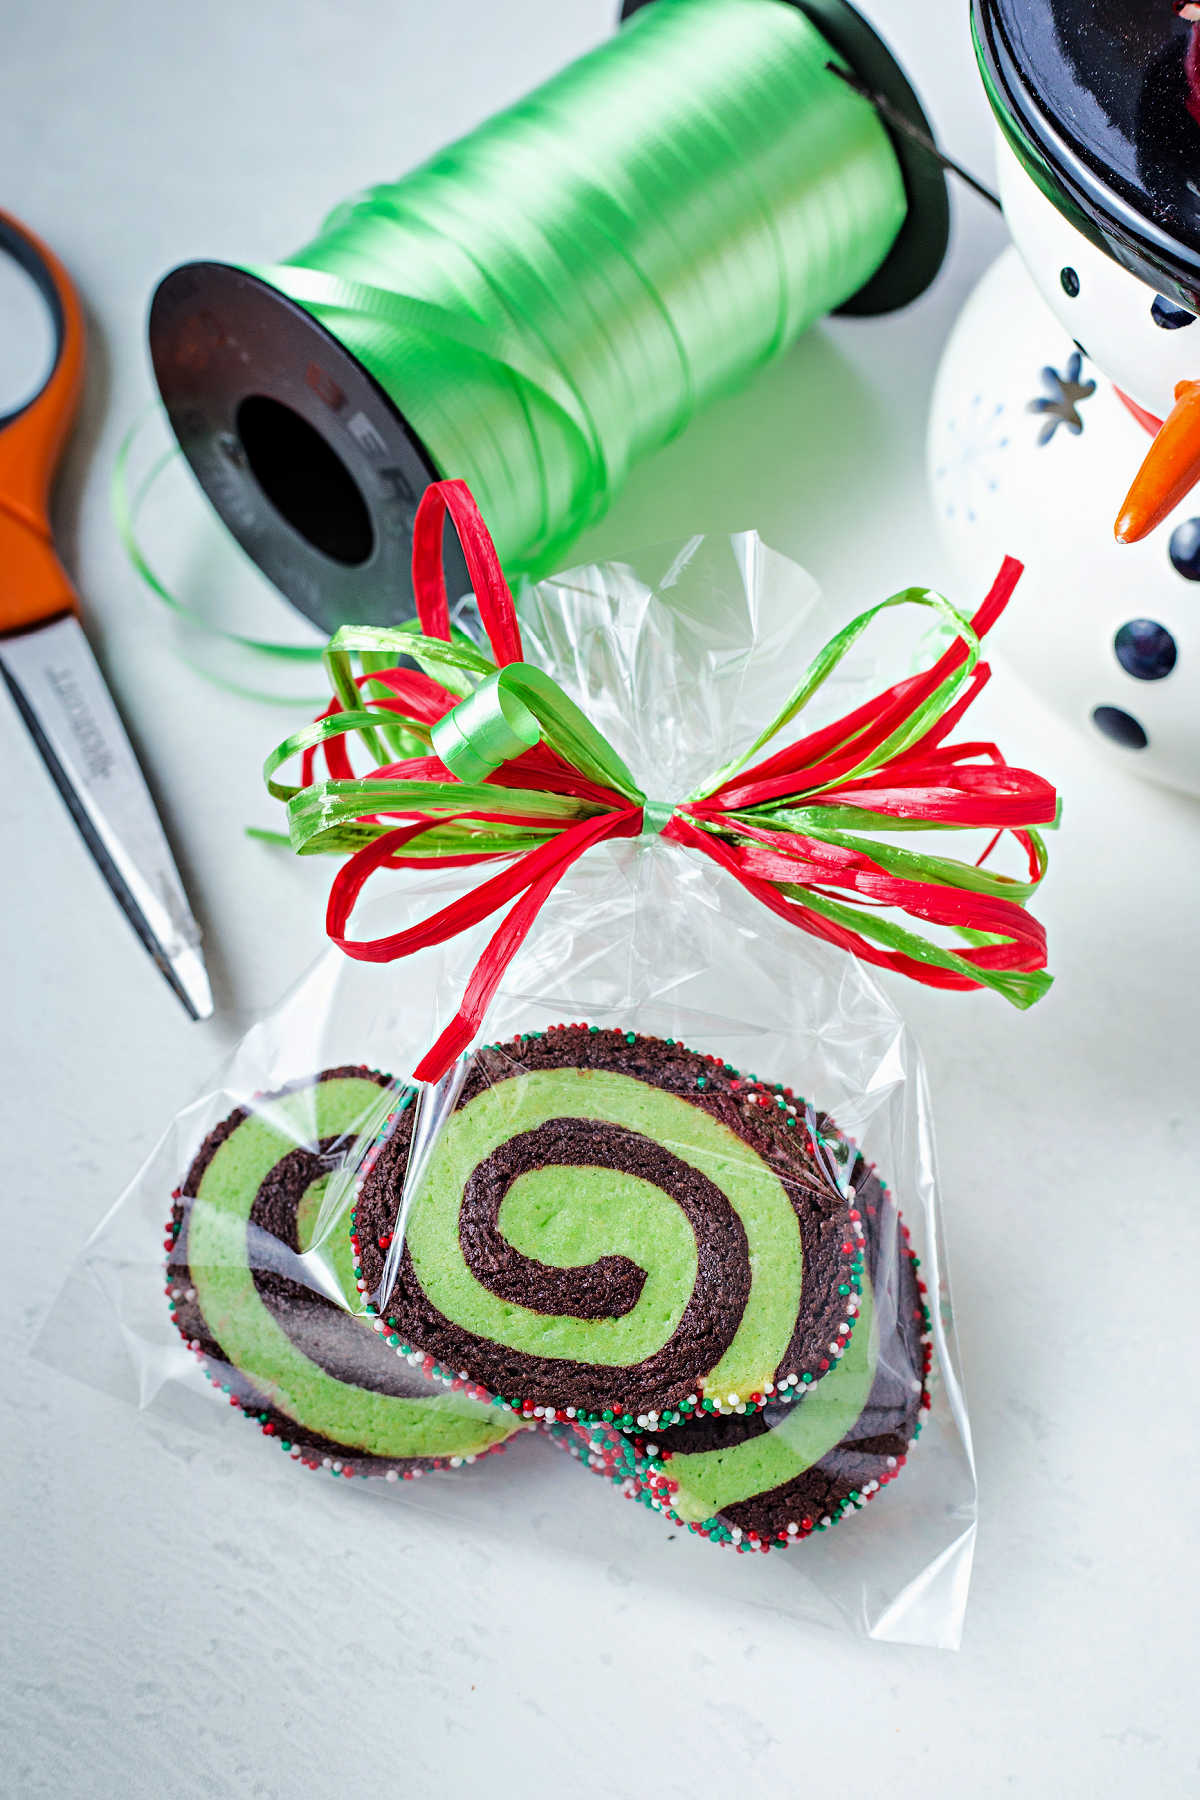 chocolate mint pinwheel cookies packaged in a cellophane bag tied with red and green ribbon on a table with a spool of ribbon and scissors.